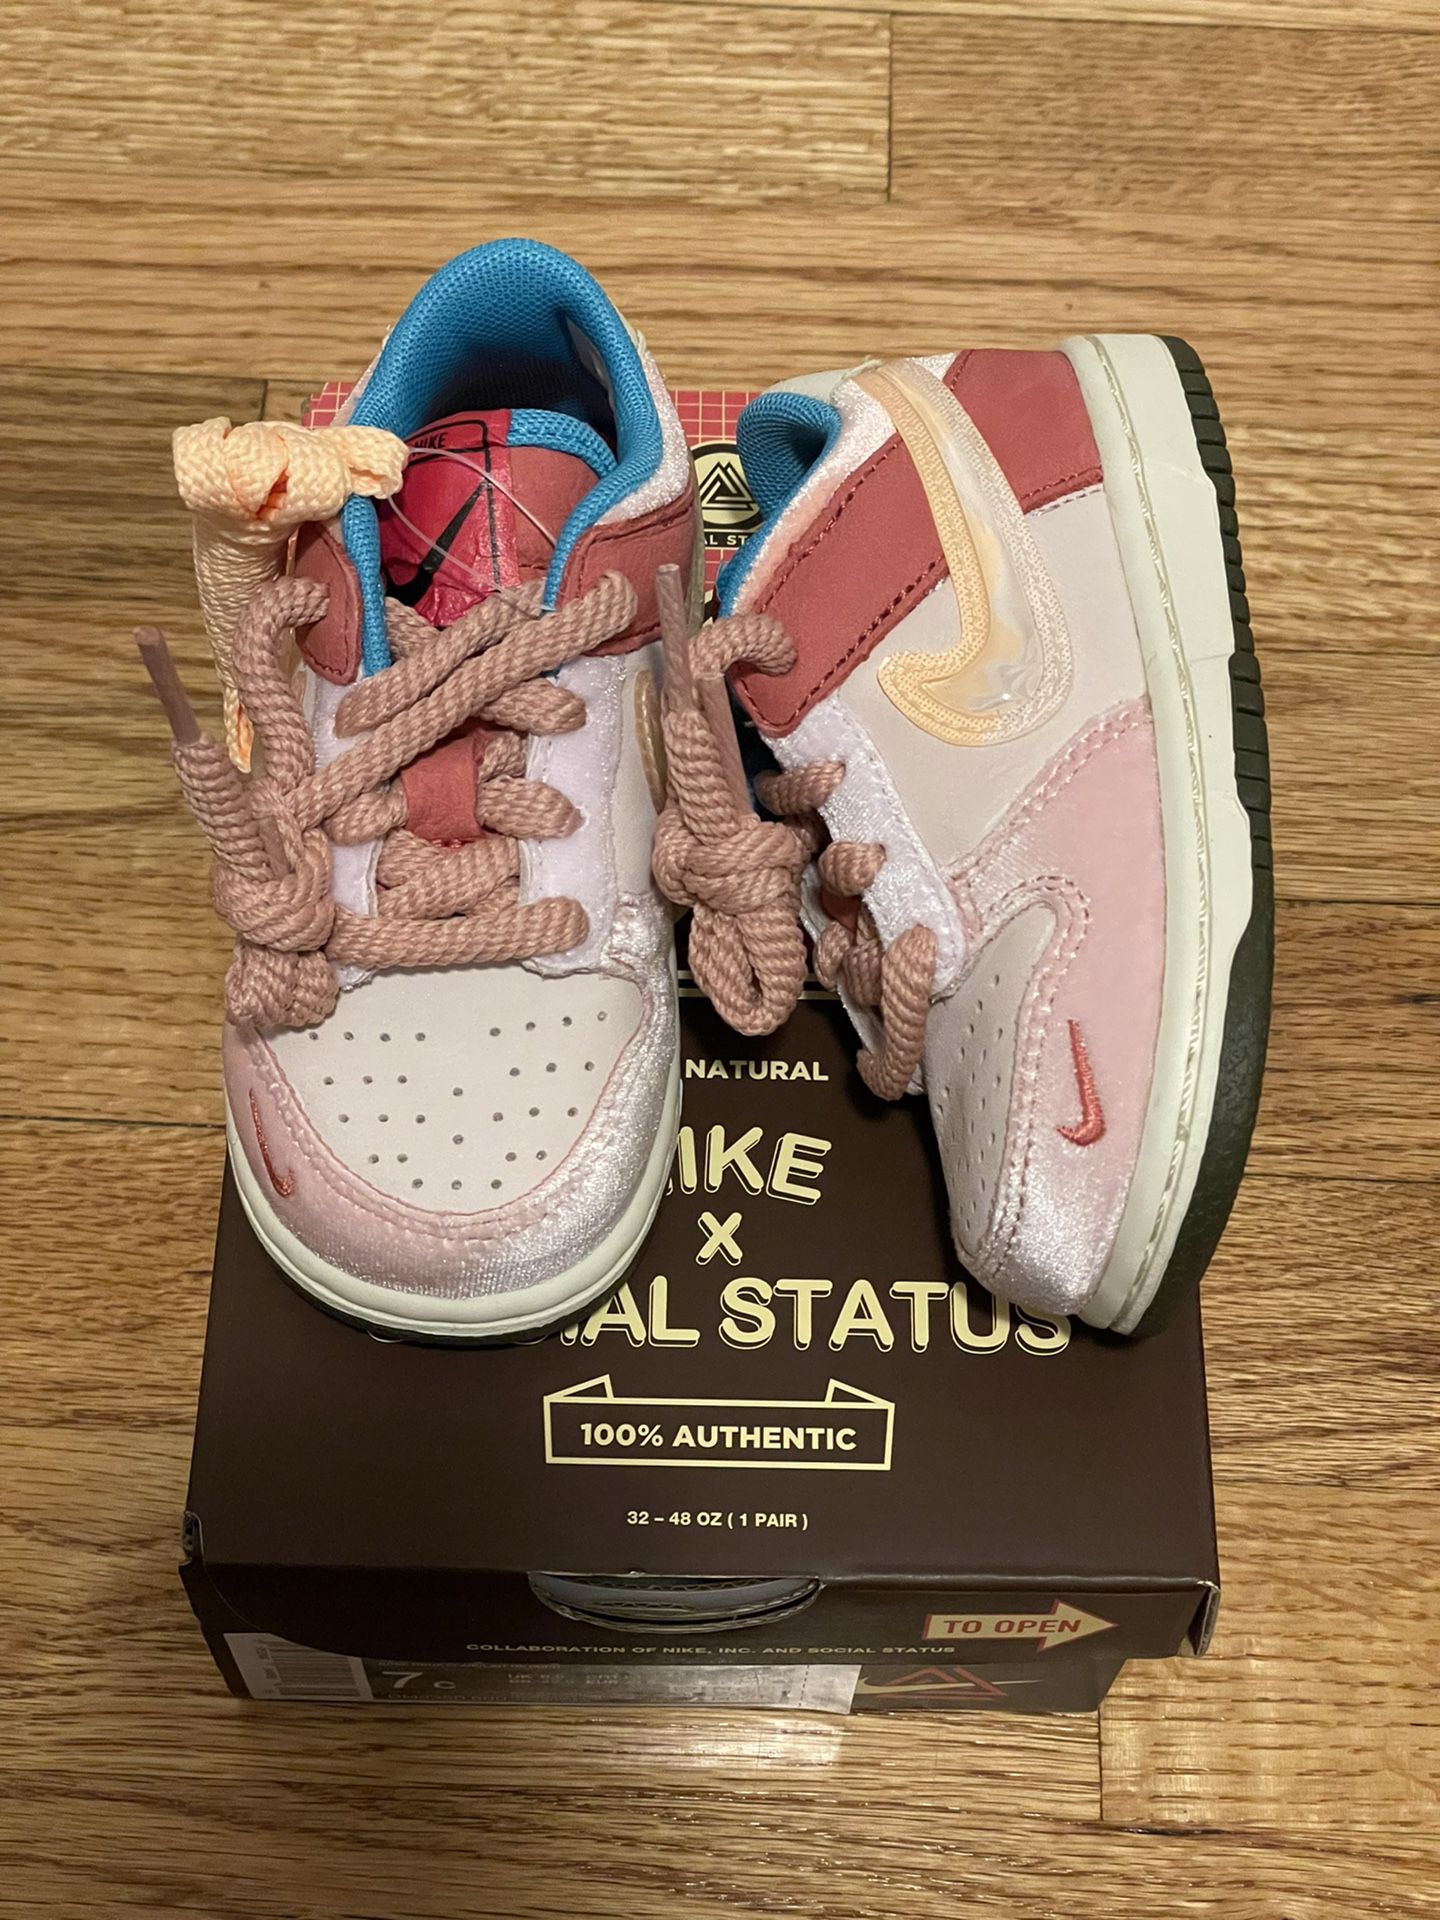 Nike Dunk Low Social Status Strawberry Milk - Size 7C TD for Sale